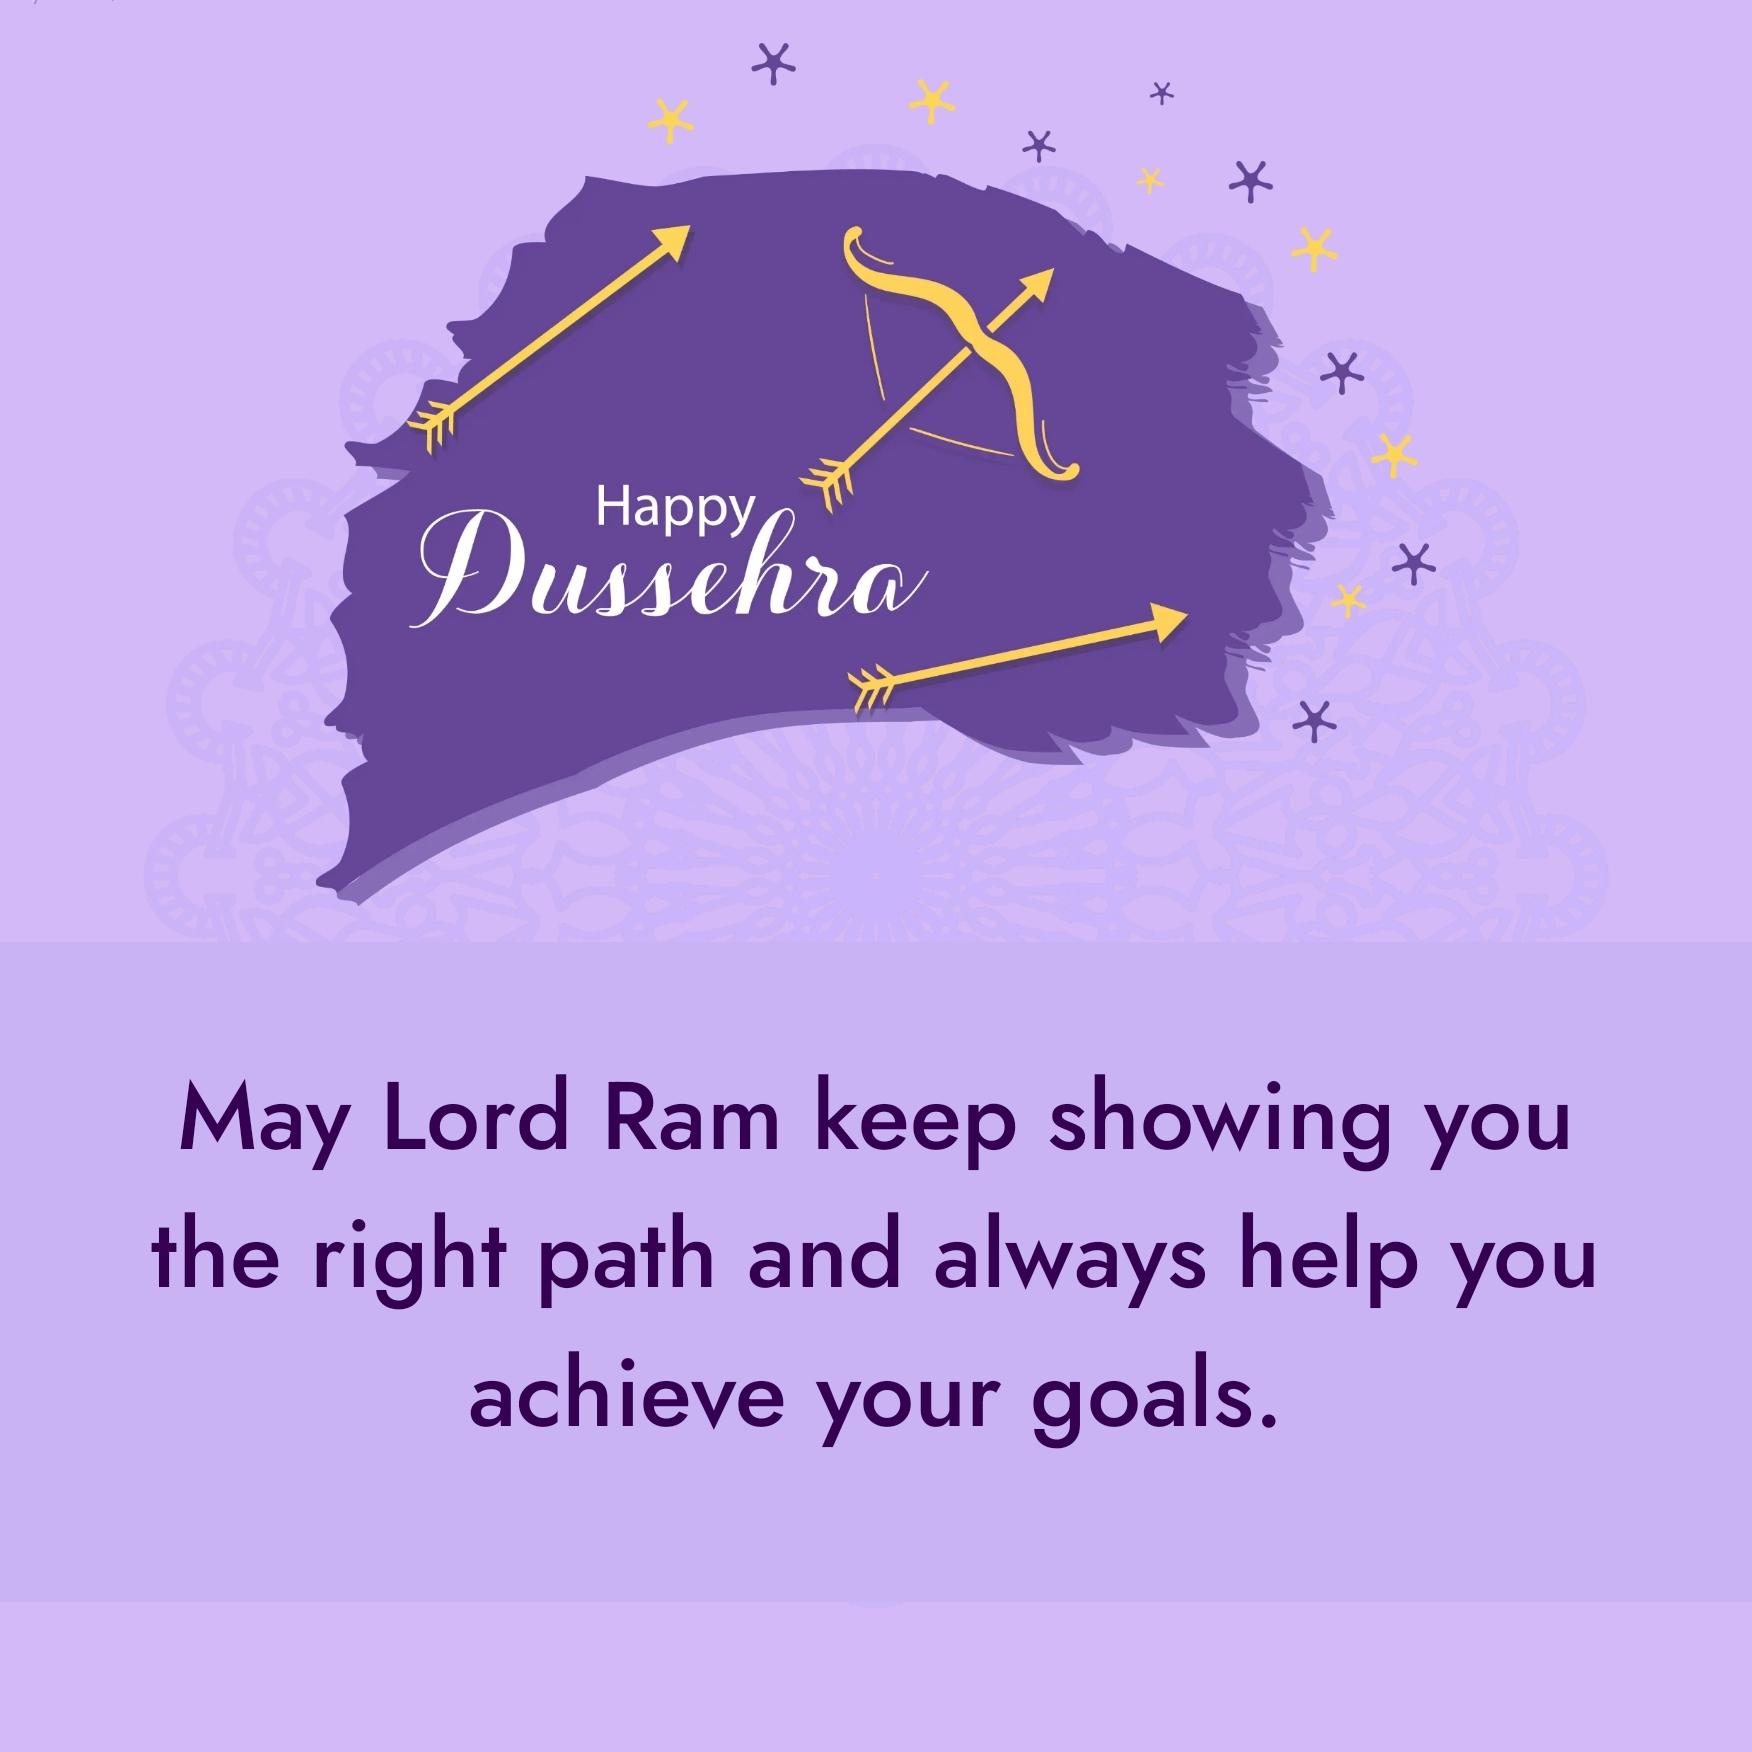 May Lord Ram keep showing you the right path